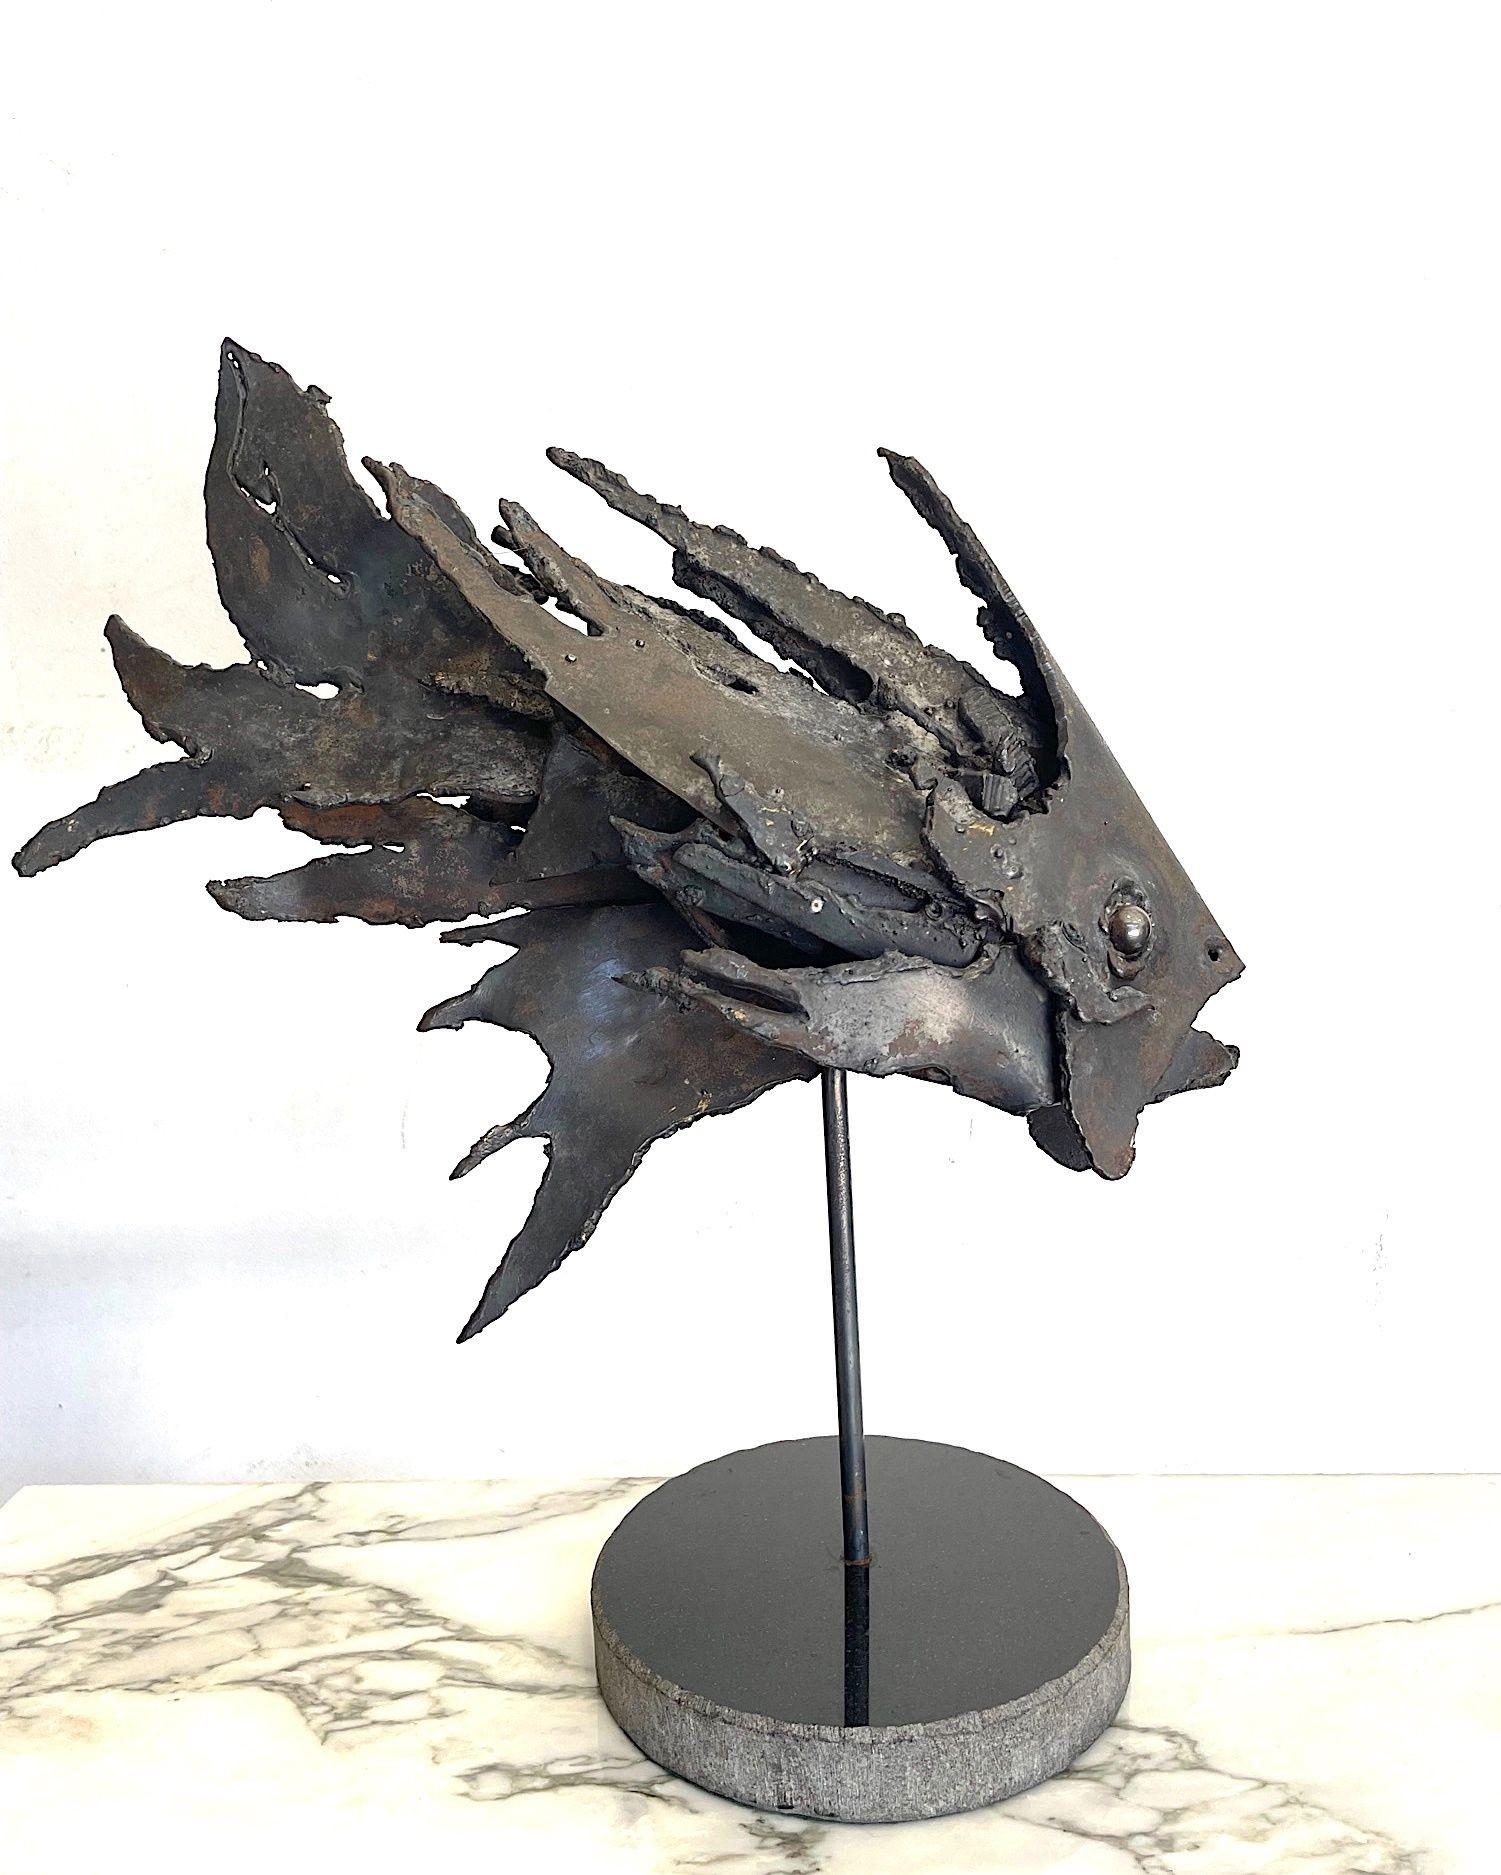 An Italian 1970s brutalist metal sculpture of a fish mounted on a black marble base.